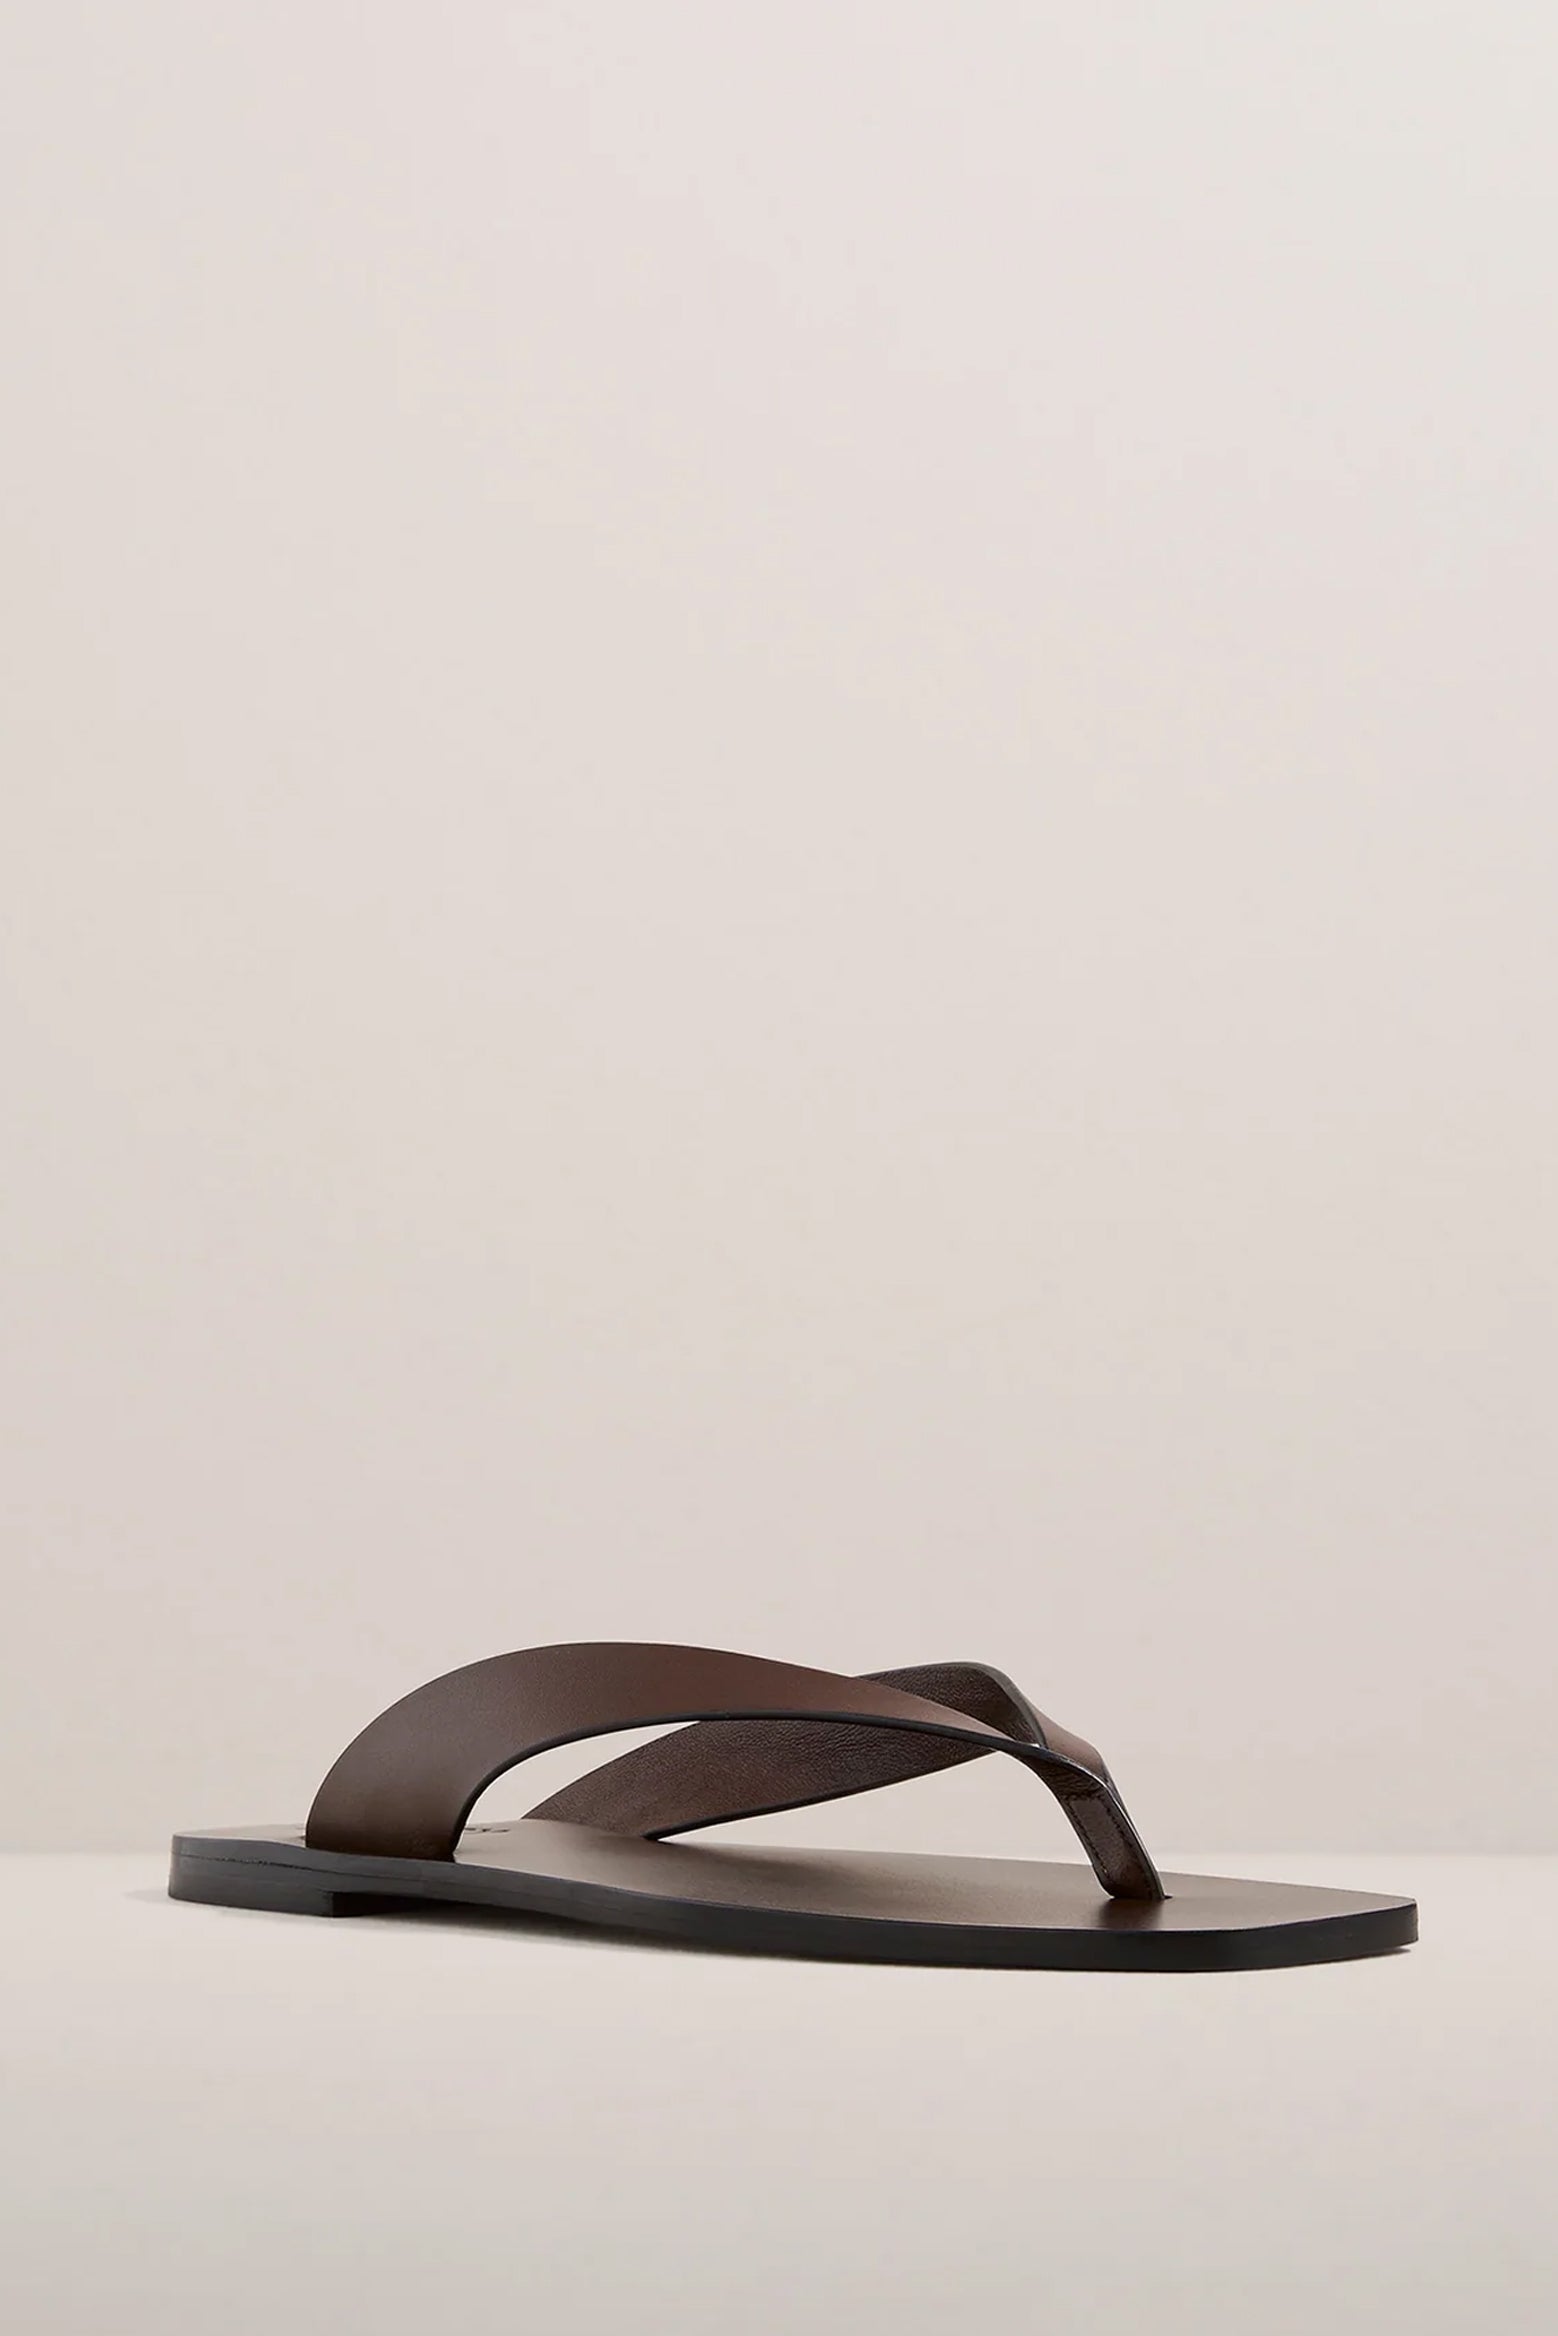 A.Emery Kinto Heel in Walnut available at The New Trend Australia.